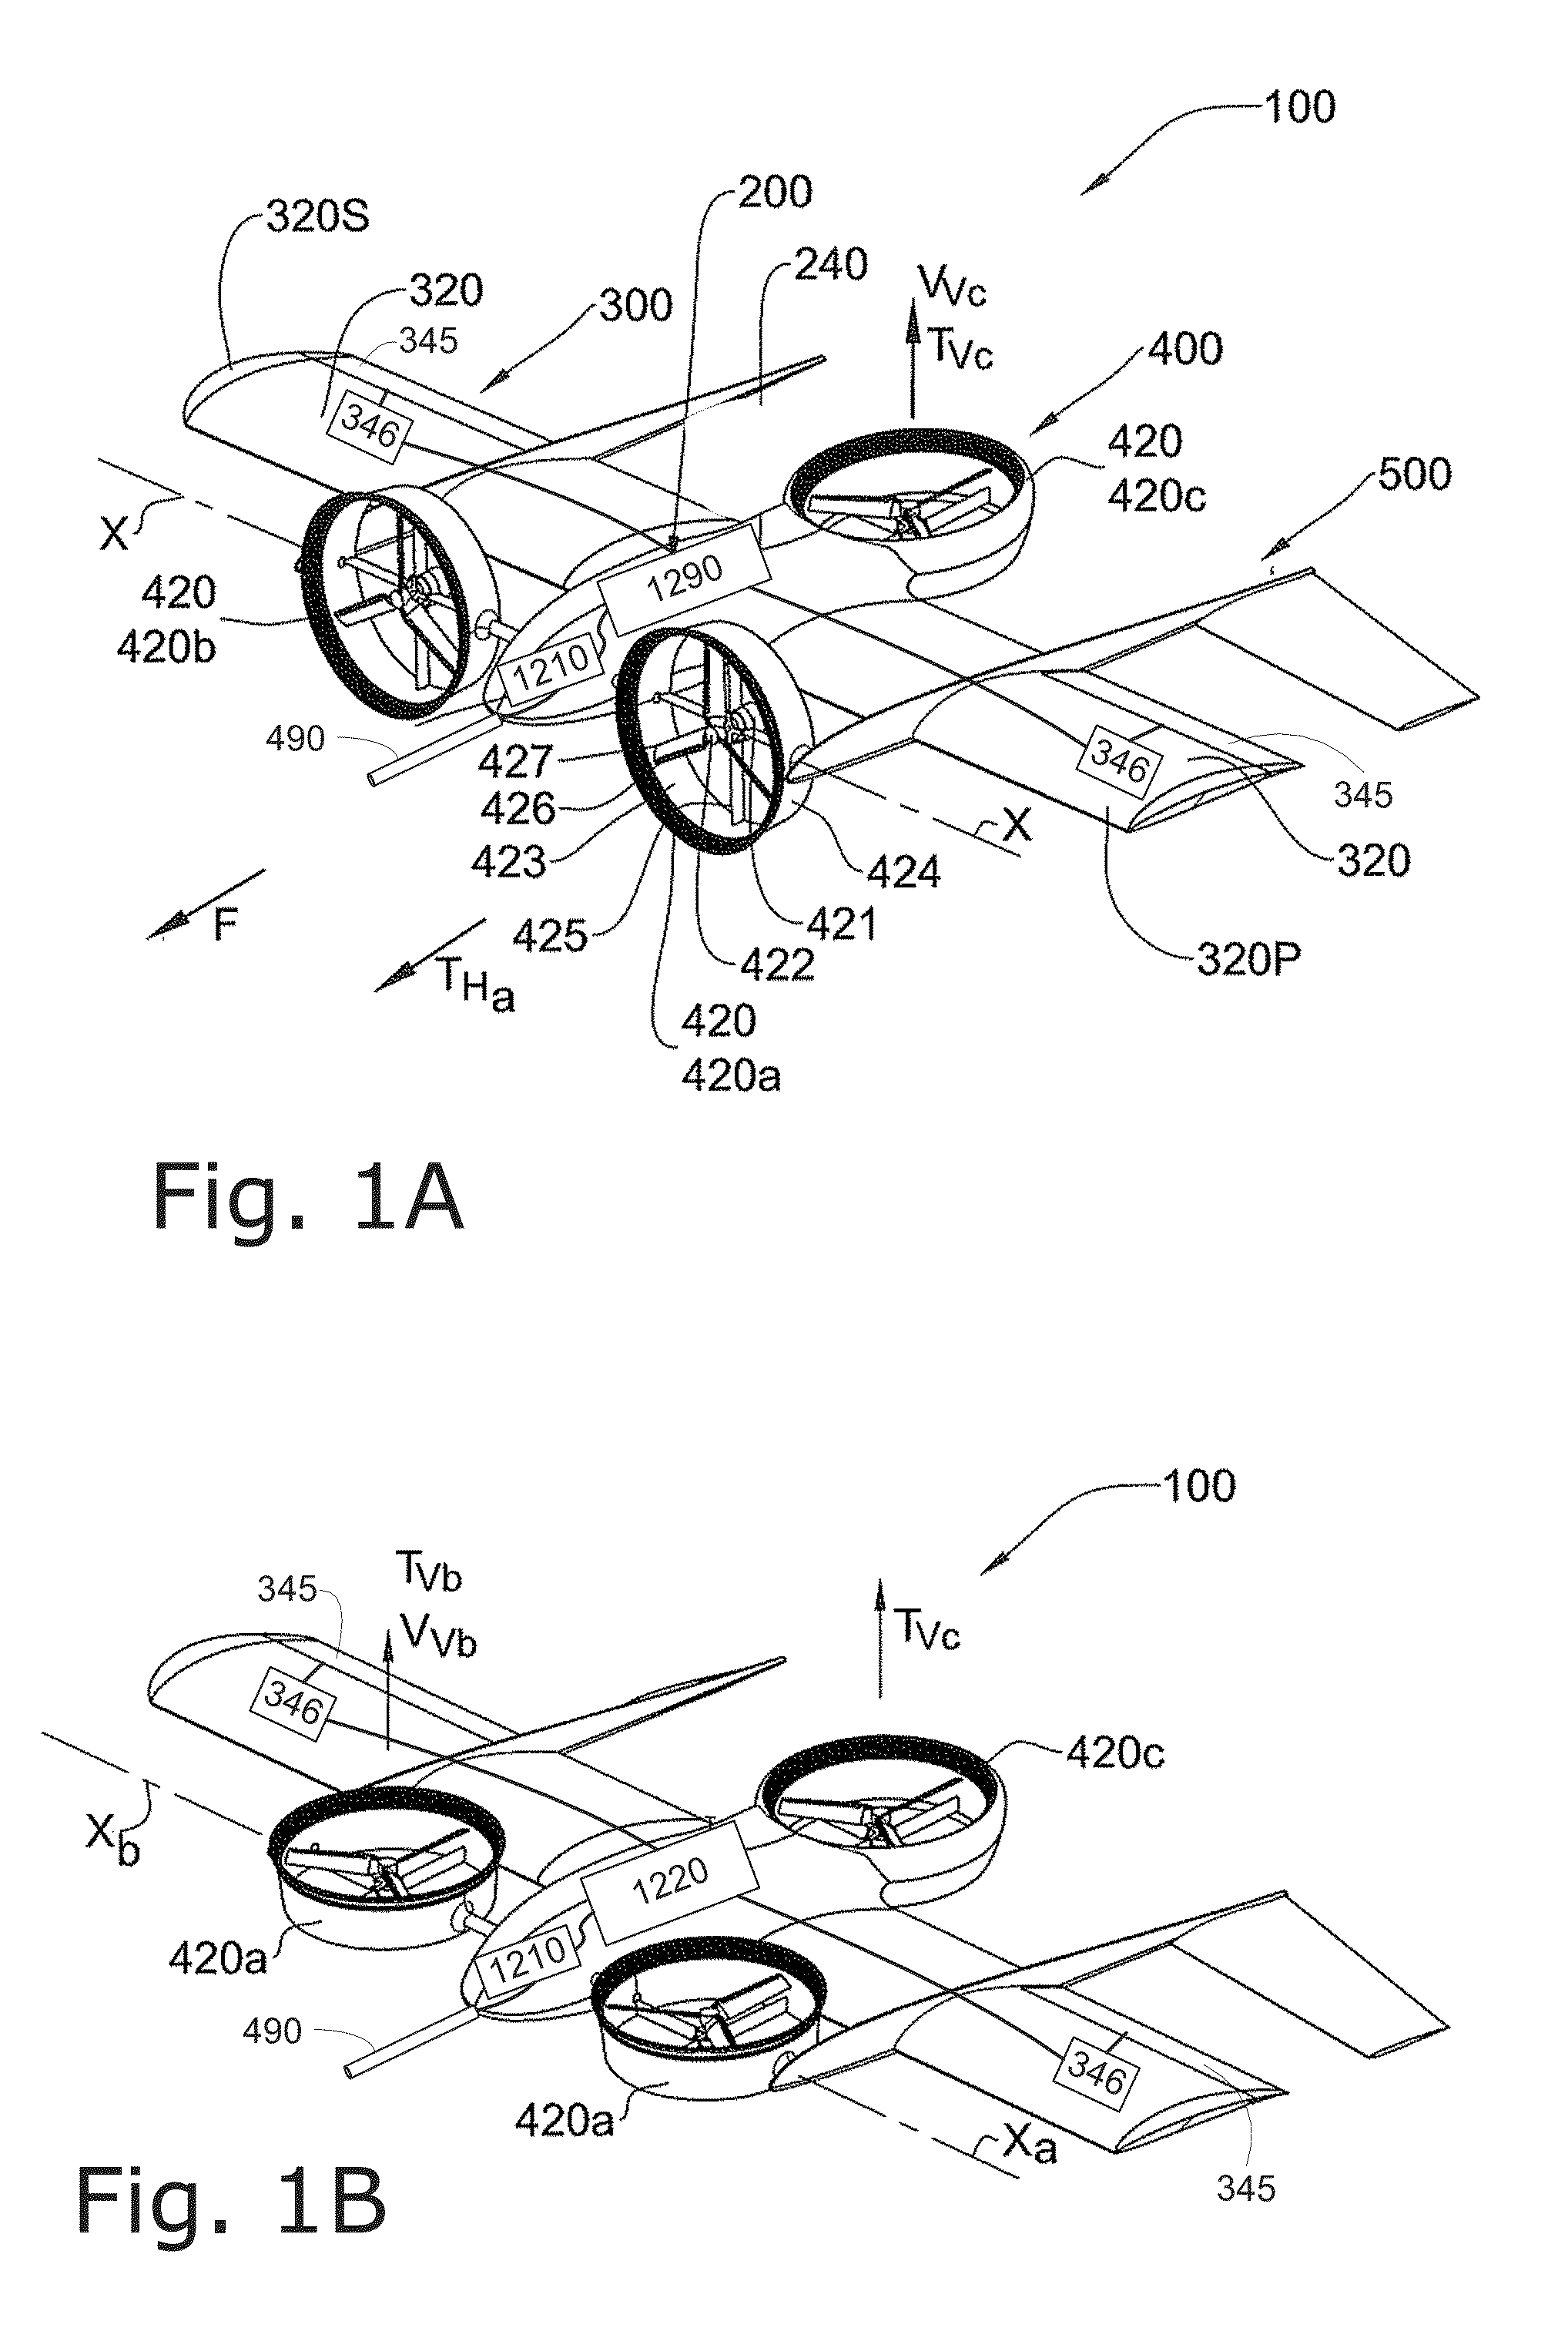 System, a method and a computer program product for maneuvering of an air vehicle